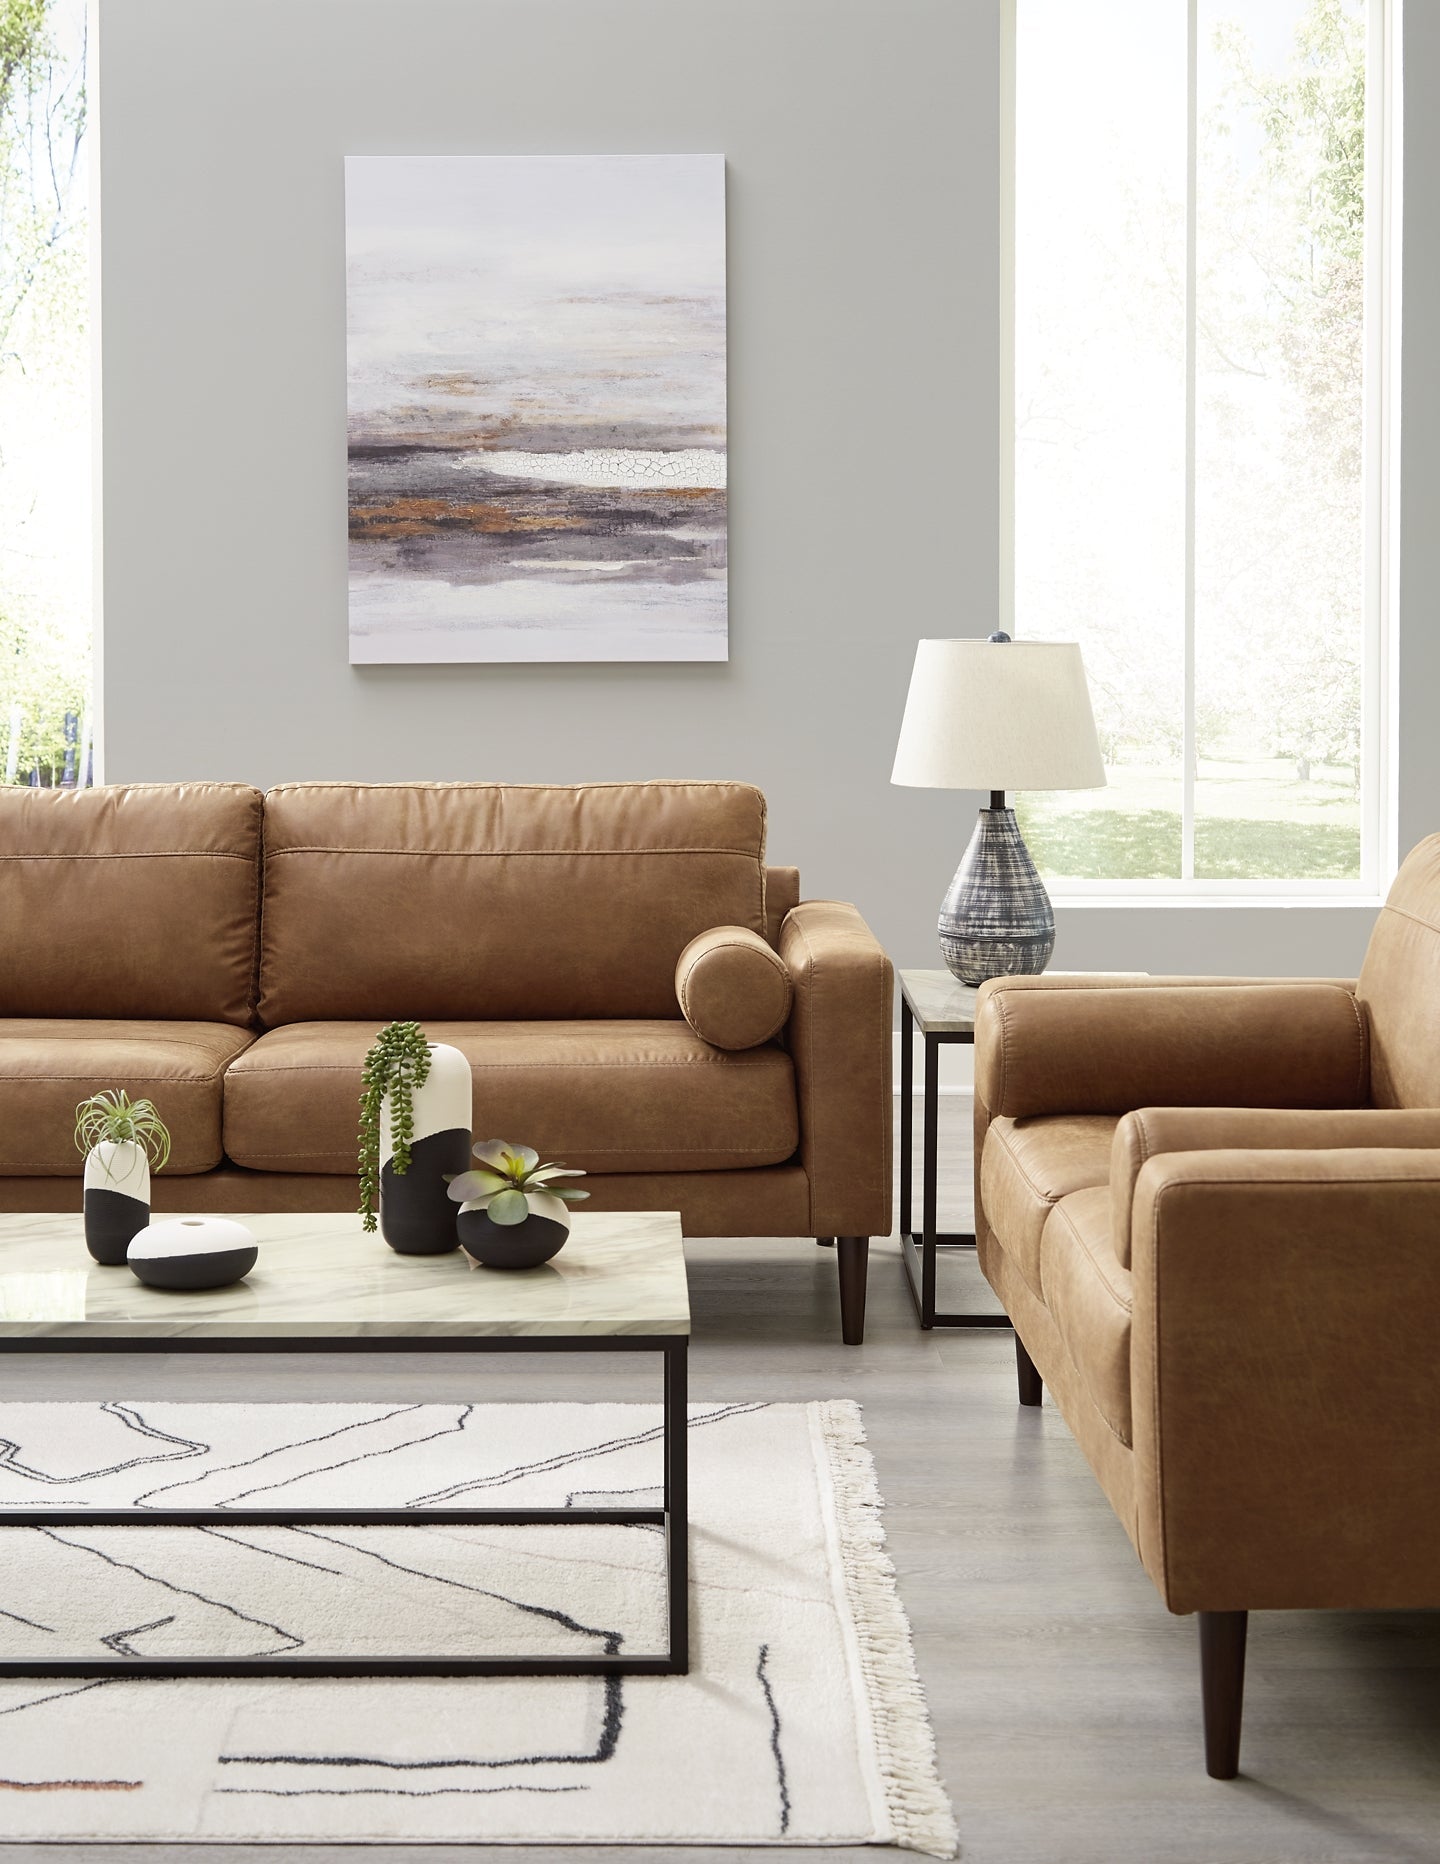 Telora Sofa and Loveseat at Walker Mattress and Furniture Locations in Cedar Park and Belton TX.